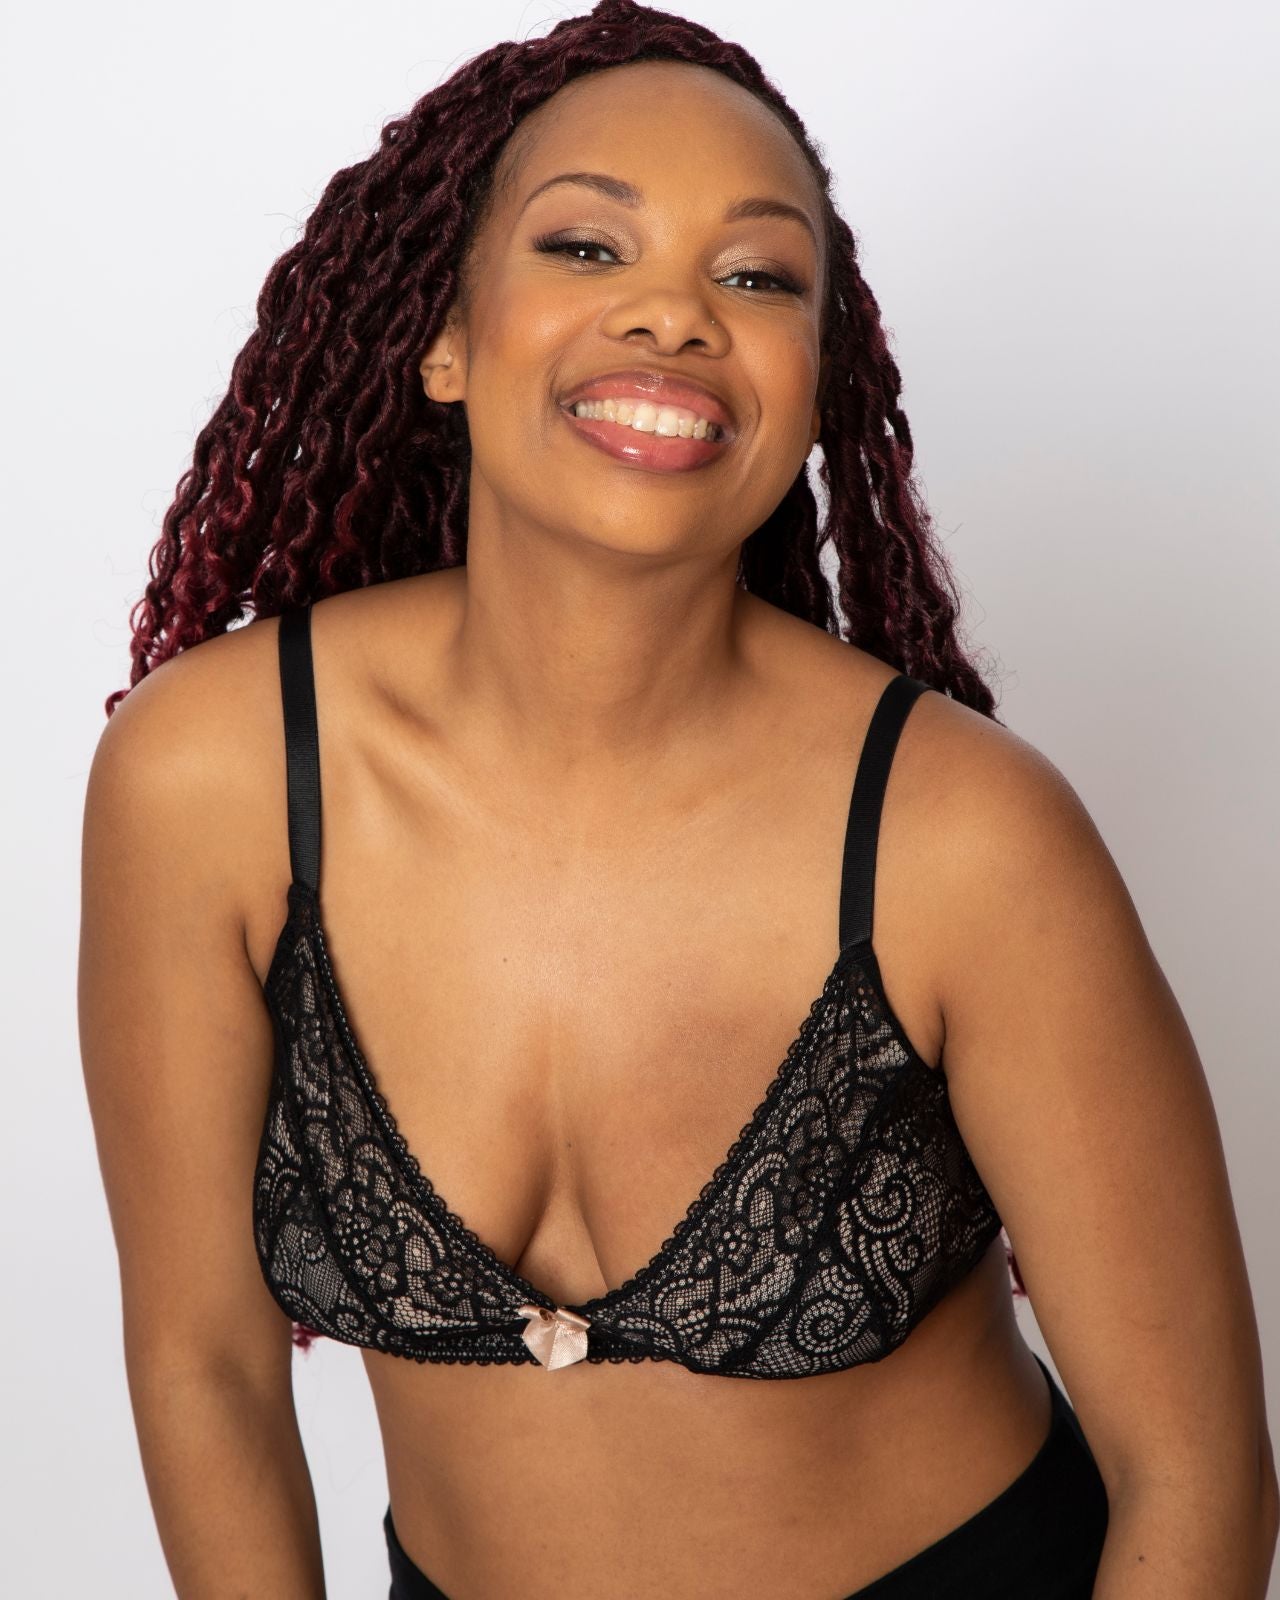 Leslie Leisure Bra in Black (pocketed) By AnaOno - XS-3X